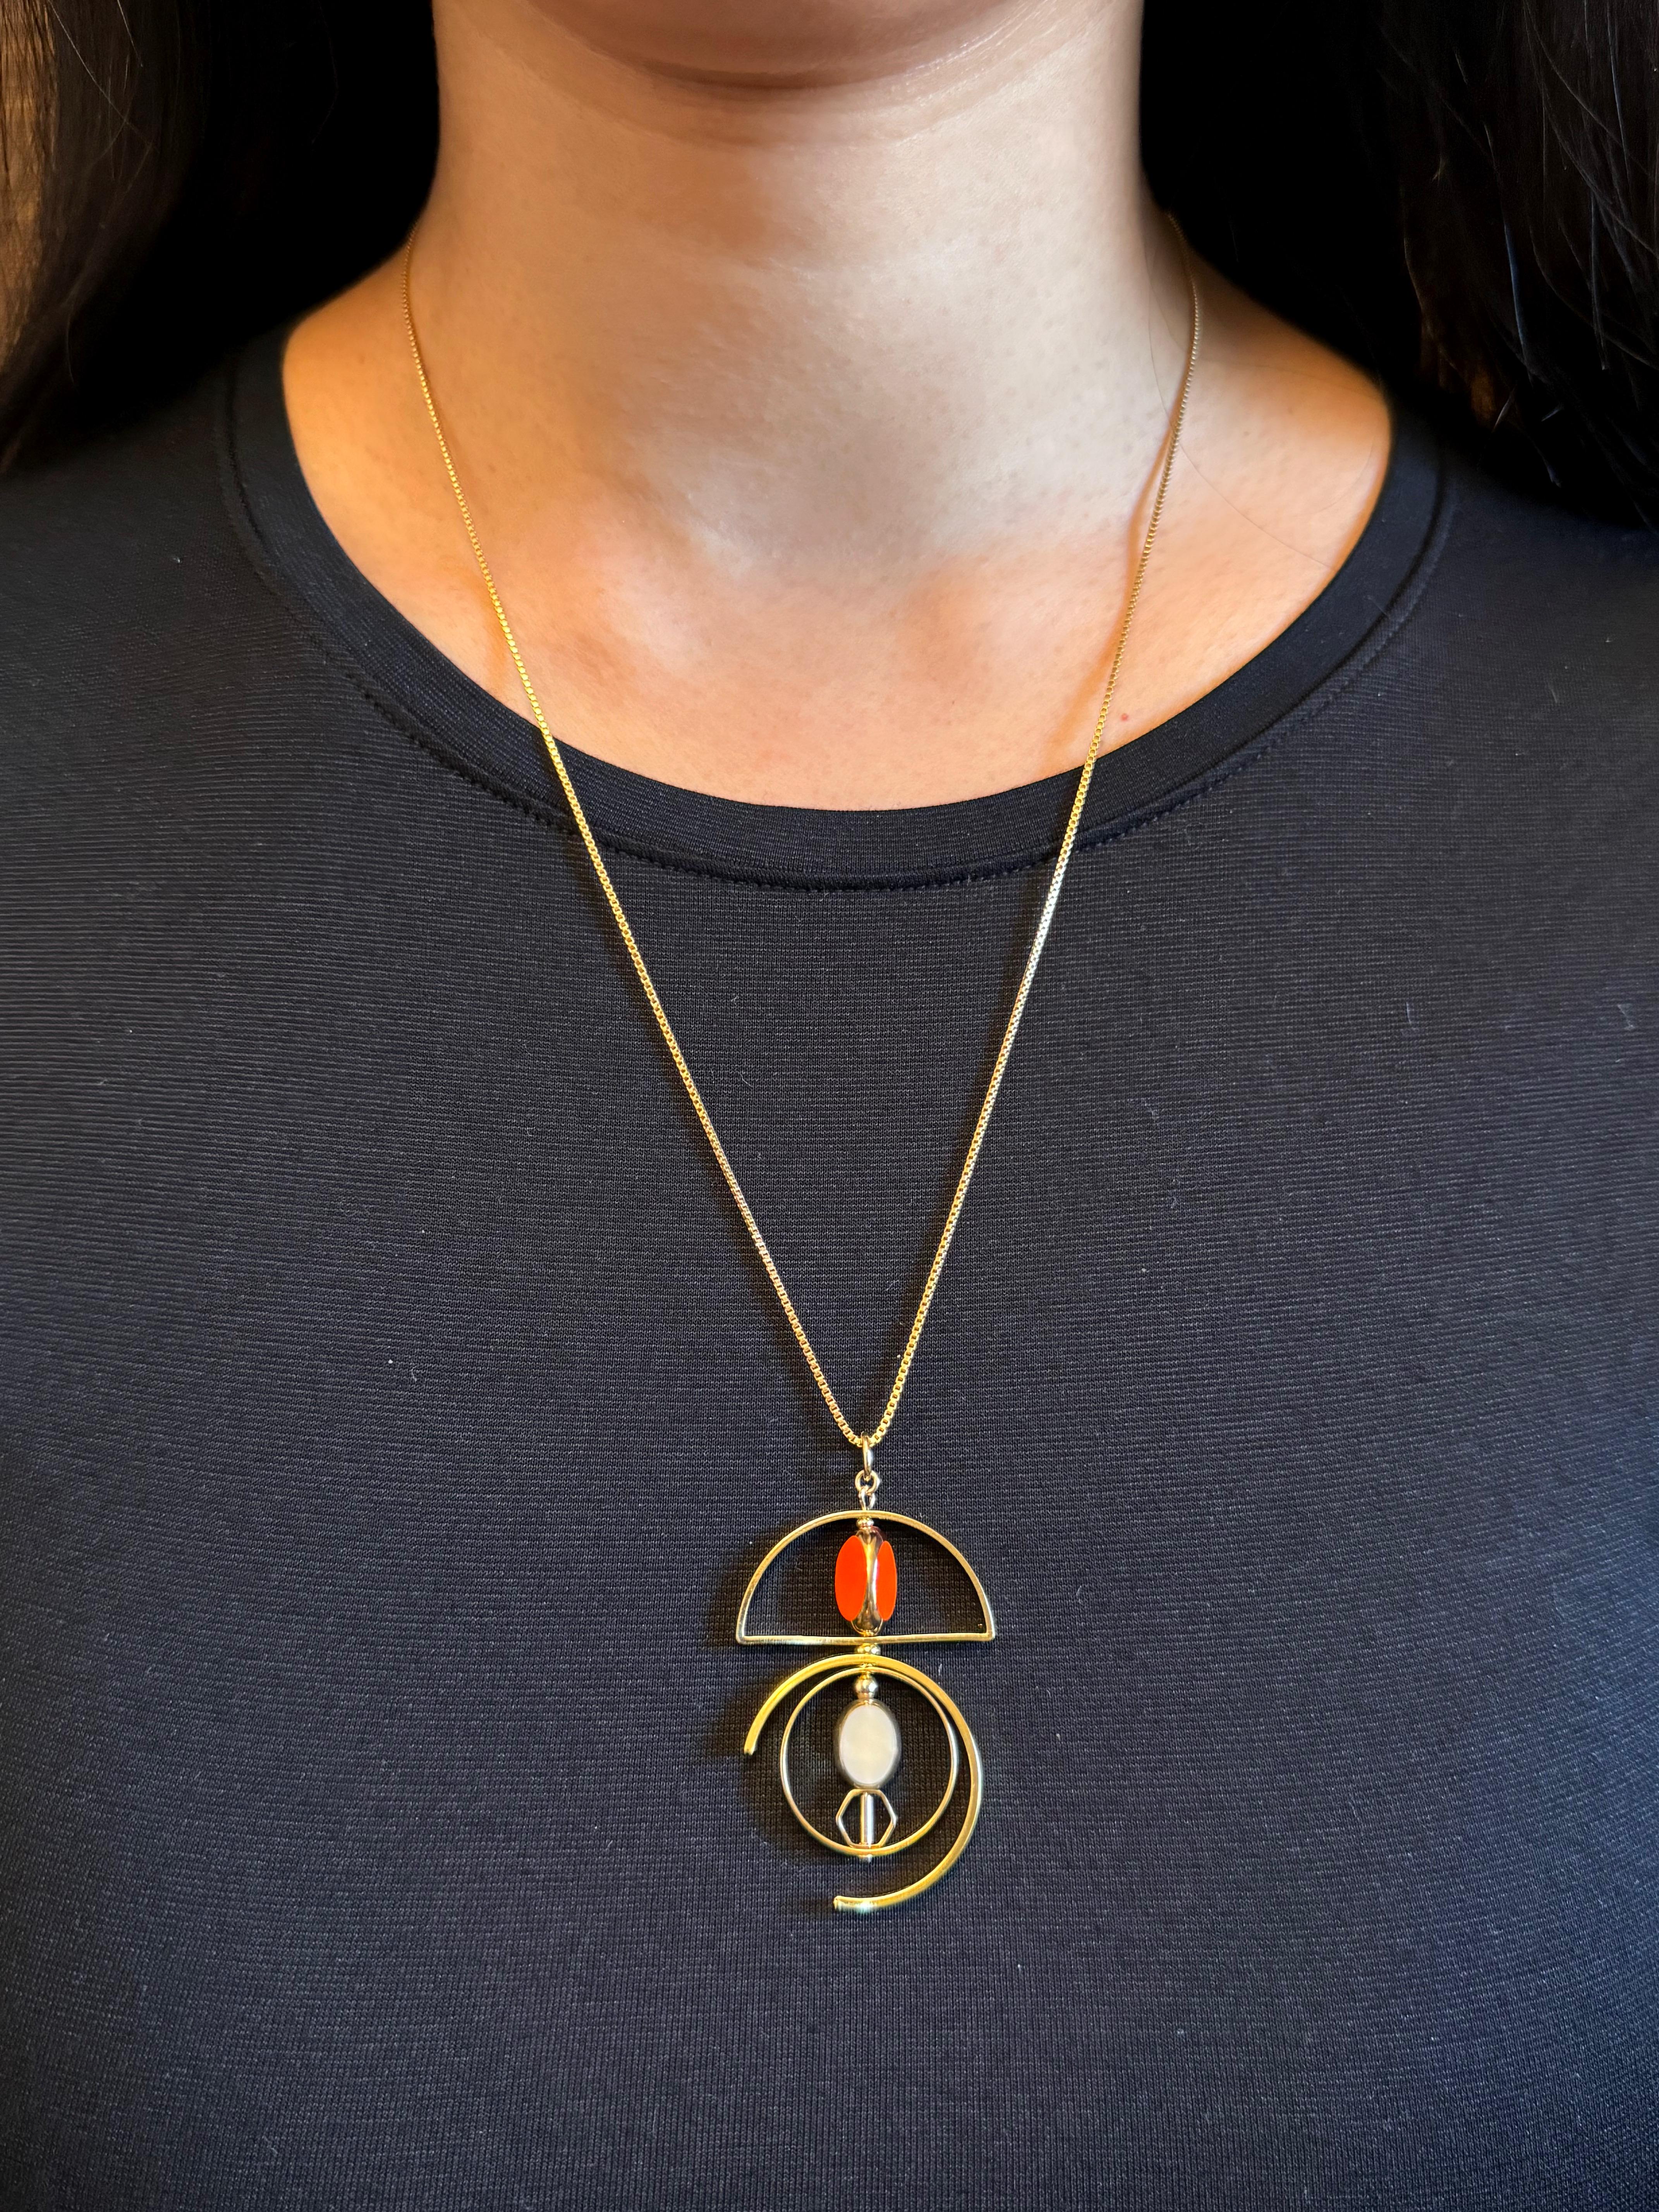 The pendant consists of beige and orange vintage German glass beads and is finished with a 22-inch gold-filled chain. 

The beads are new old stock vintage German glass beads that are framed with 24K gold. The beads were hand-pressed during the